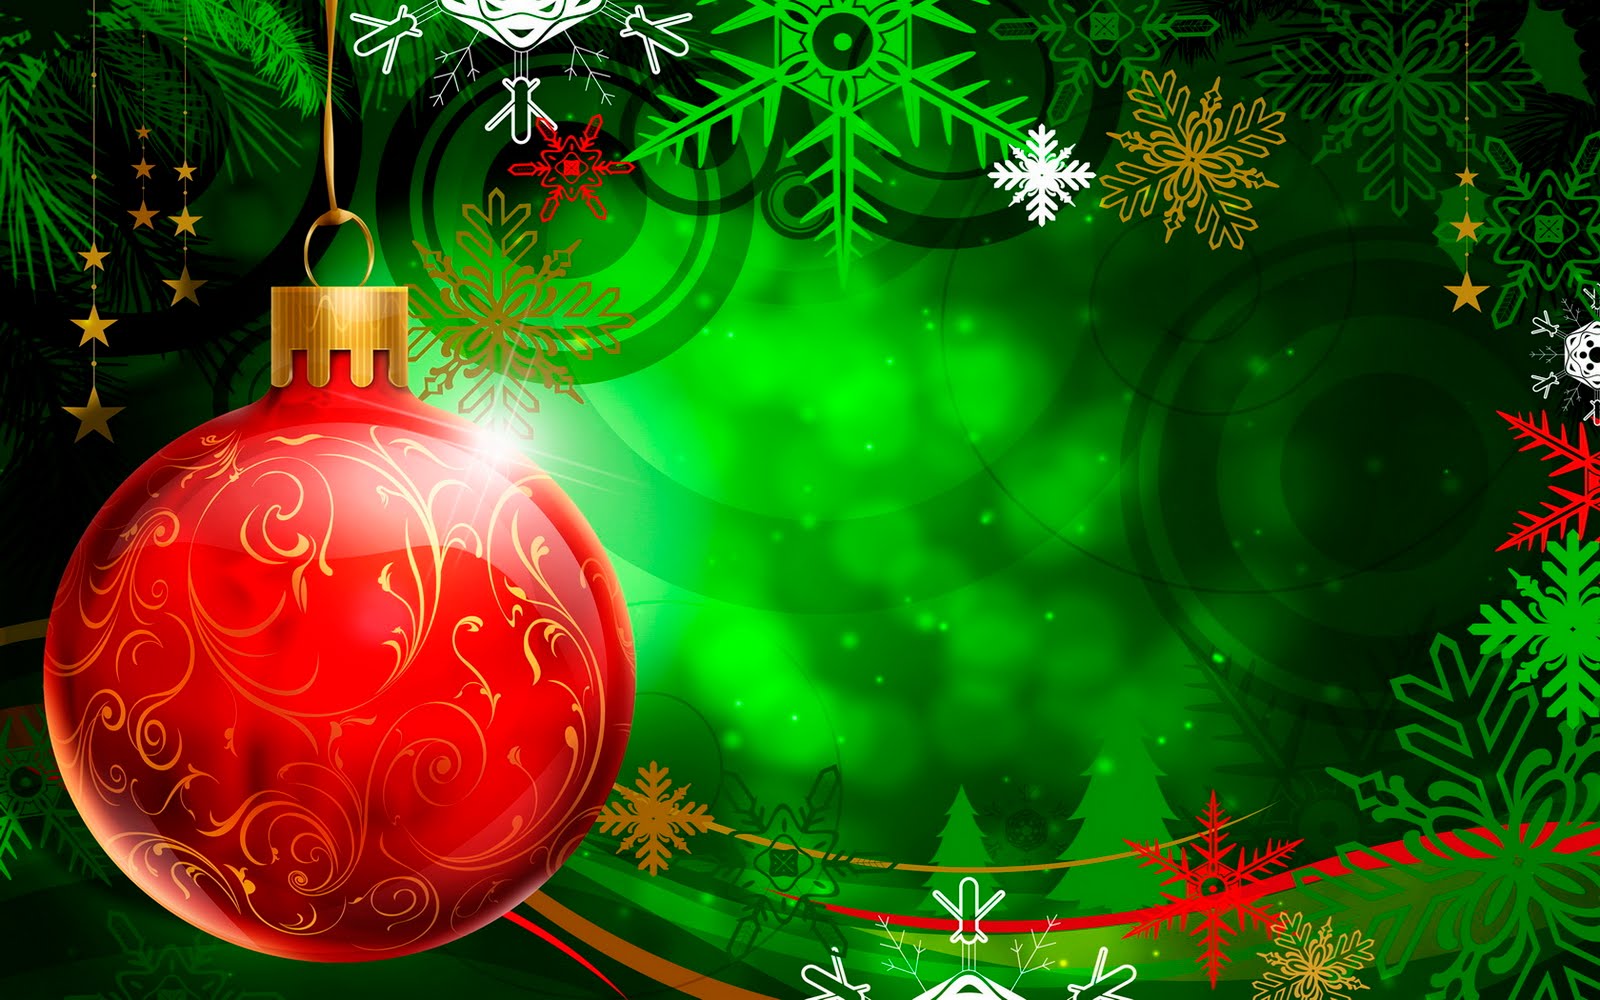 High Definition Photo And Wallpapers: free christmas wallpaper ...